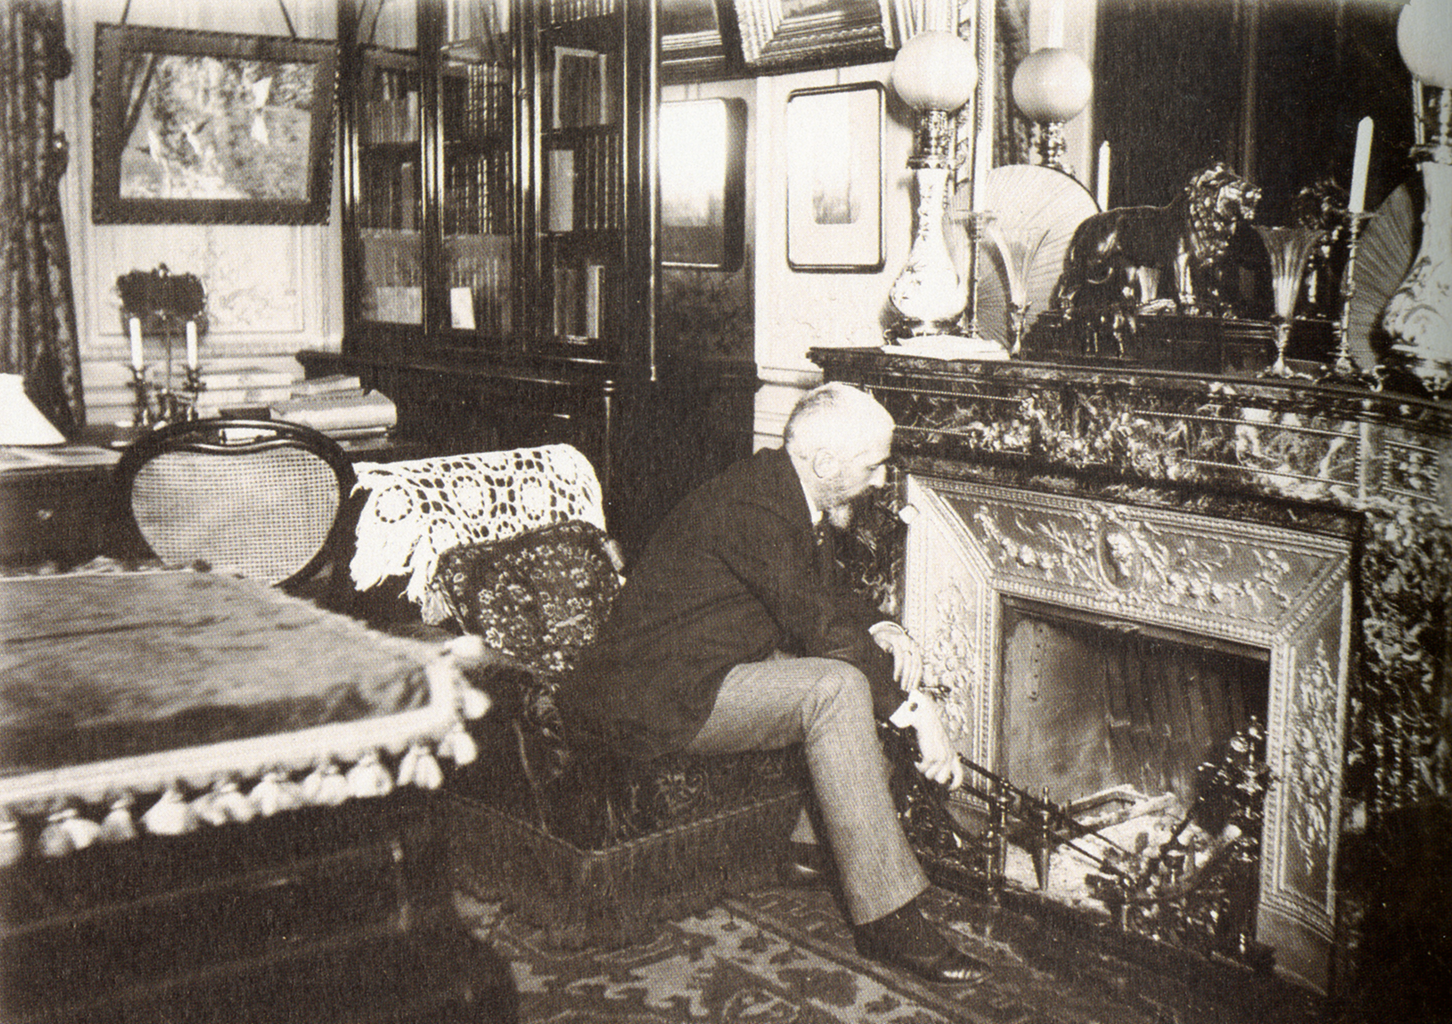 A black and white photograph of a man facing an ornamental fireplace. In the background there is a large bookshelf with other paintings hanging around it.